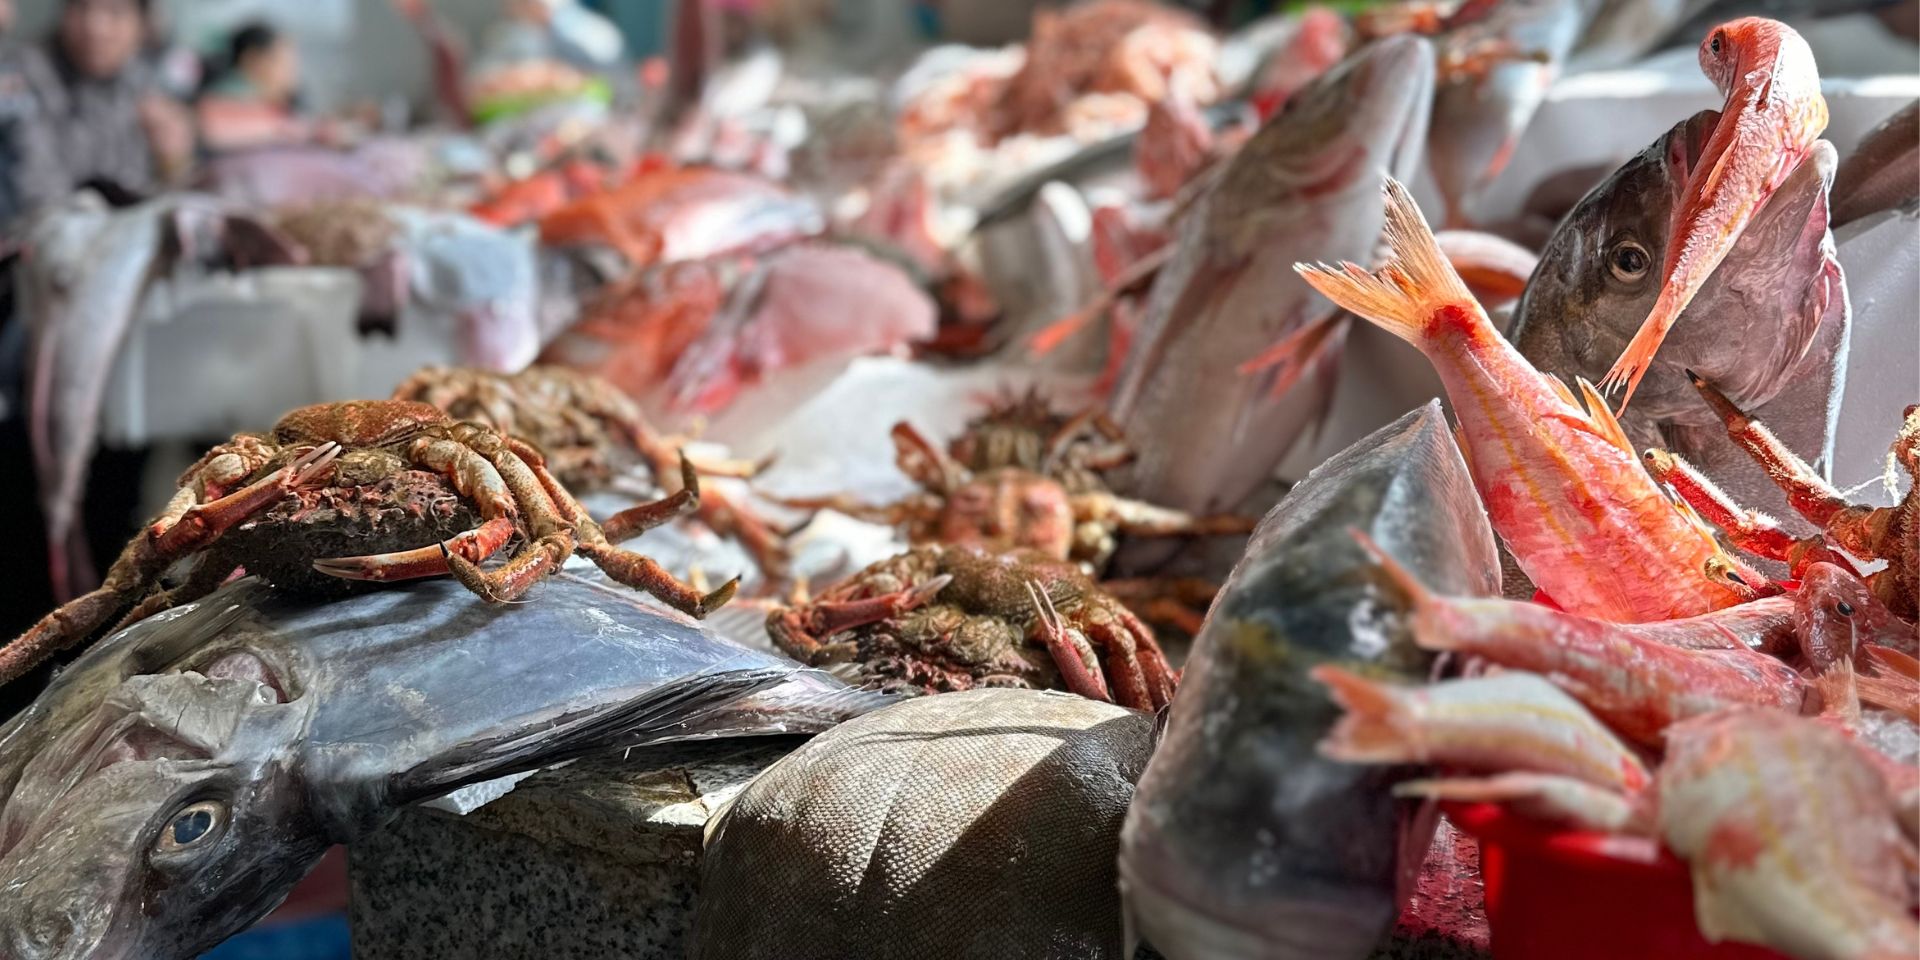 A variety of fresh seafood, including fish and crustaceans, displayed on ice at a market during a Tangier food tour.